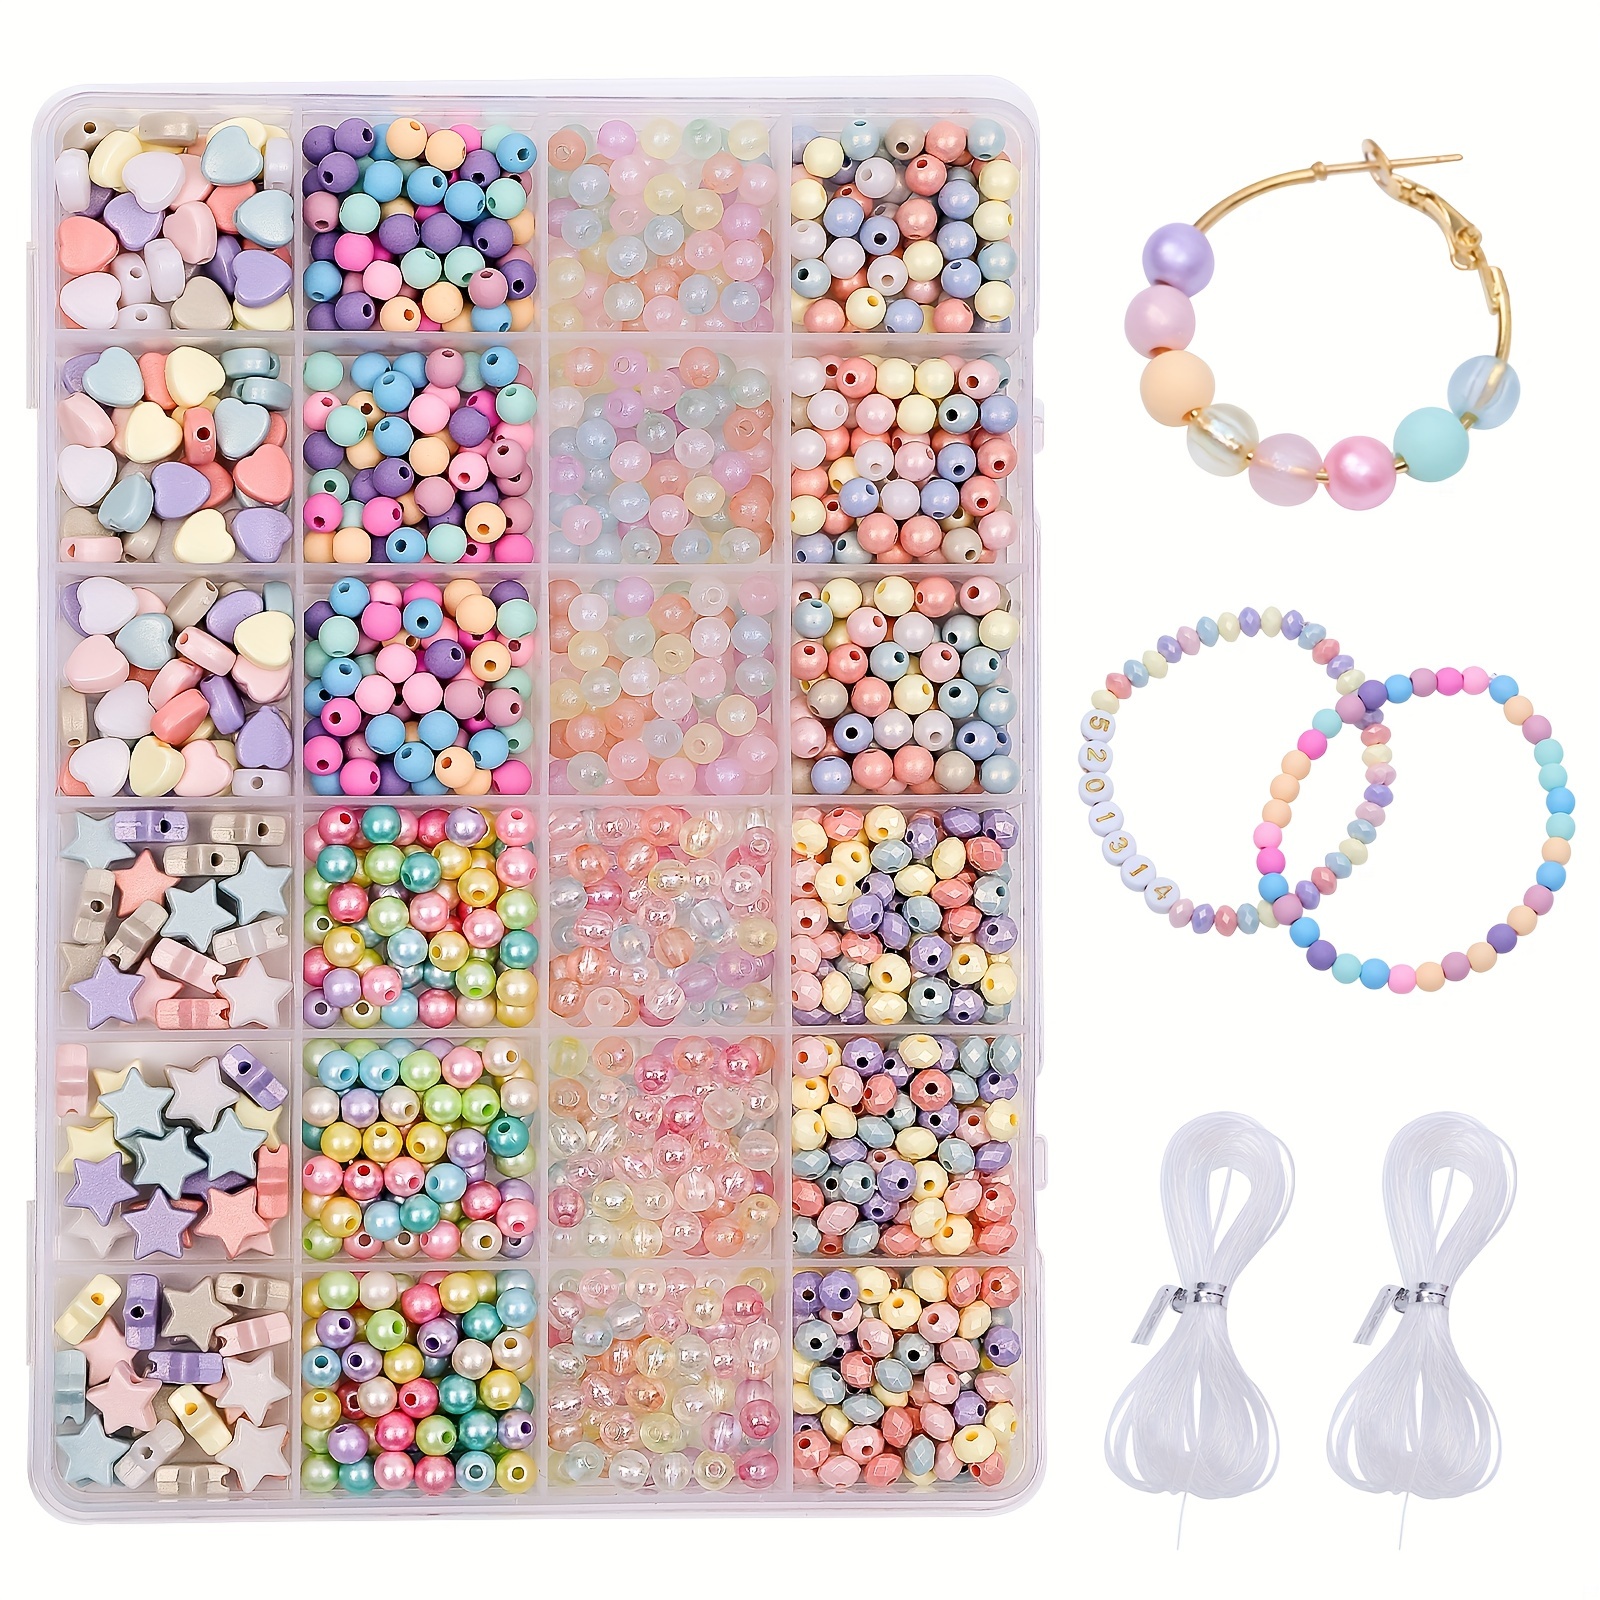 5800Pcs 3mm Beads Started ,Small Craft Beads with Beading ,Tweezers and  Elastic String for DIY Bracelet Necklace Jewelry 